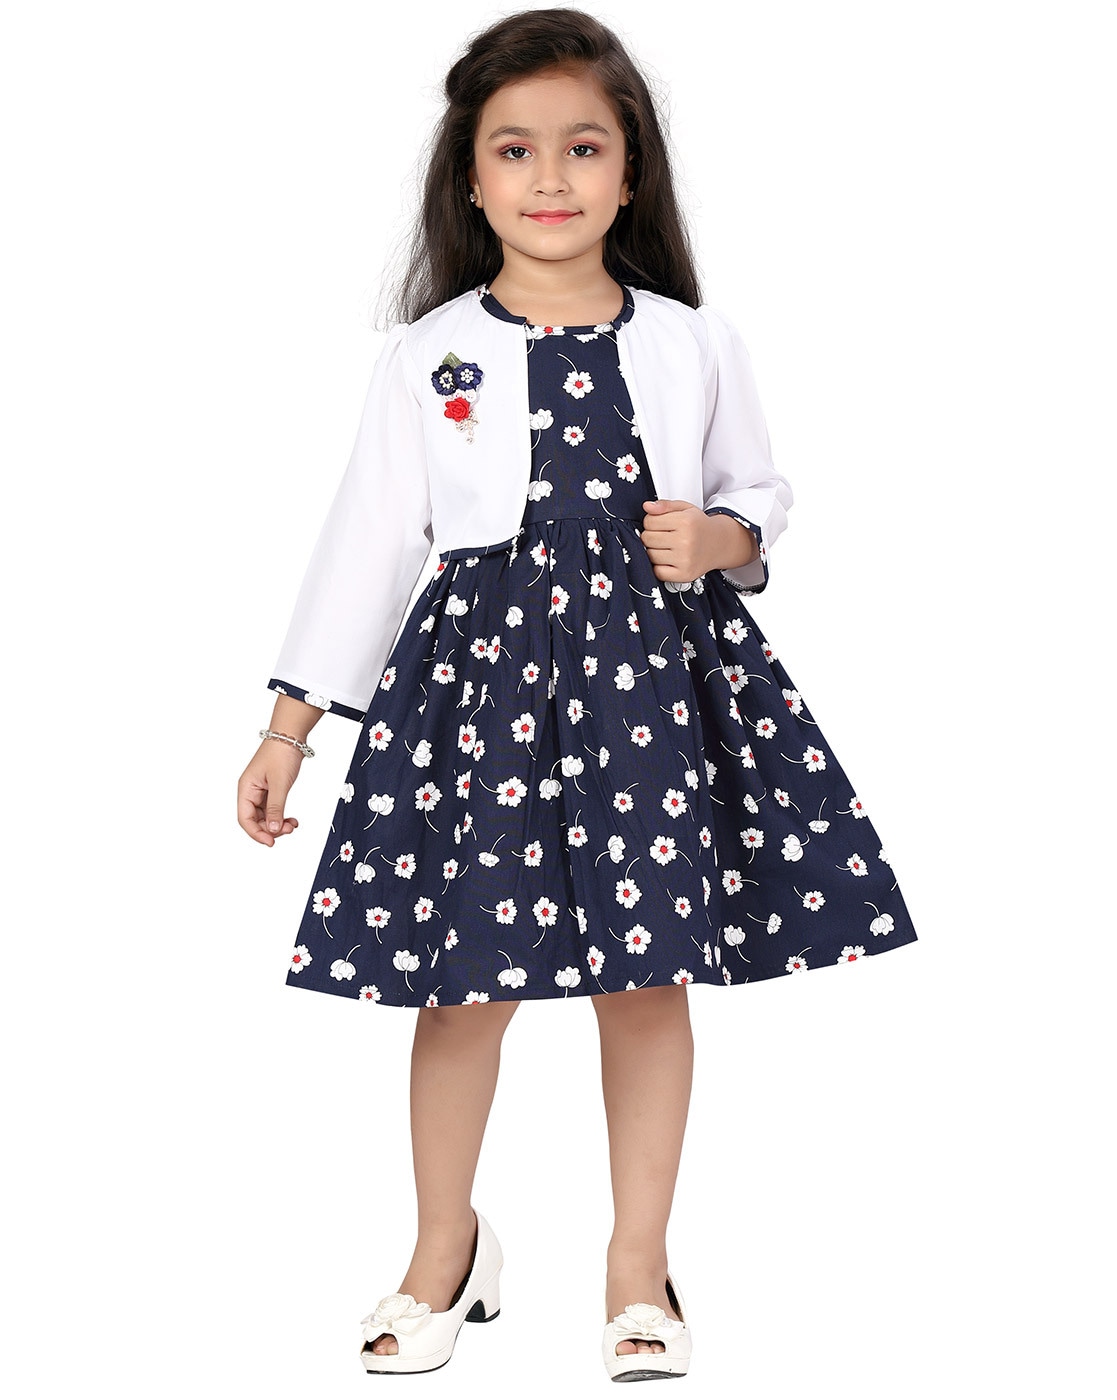 Preppy Girls' Fashion | Toddlers Trench Coat Dress - Mia Belle Girls